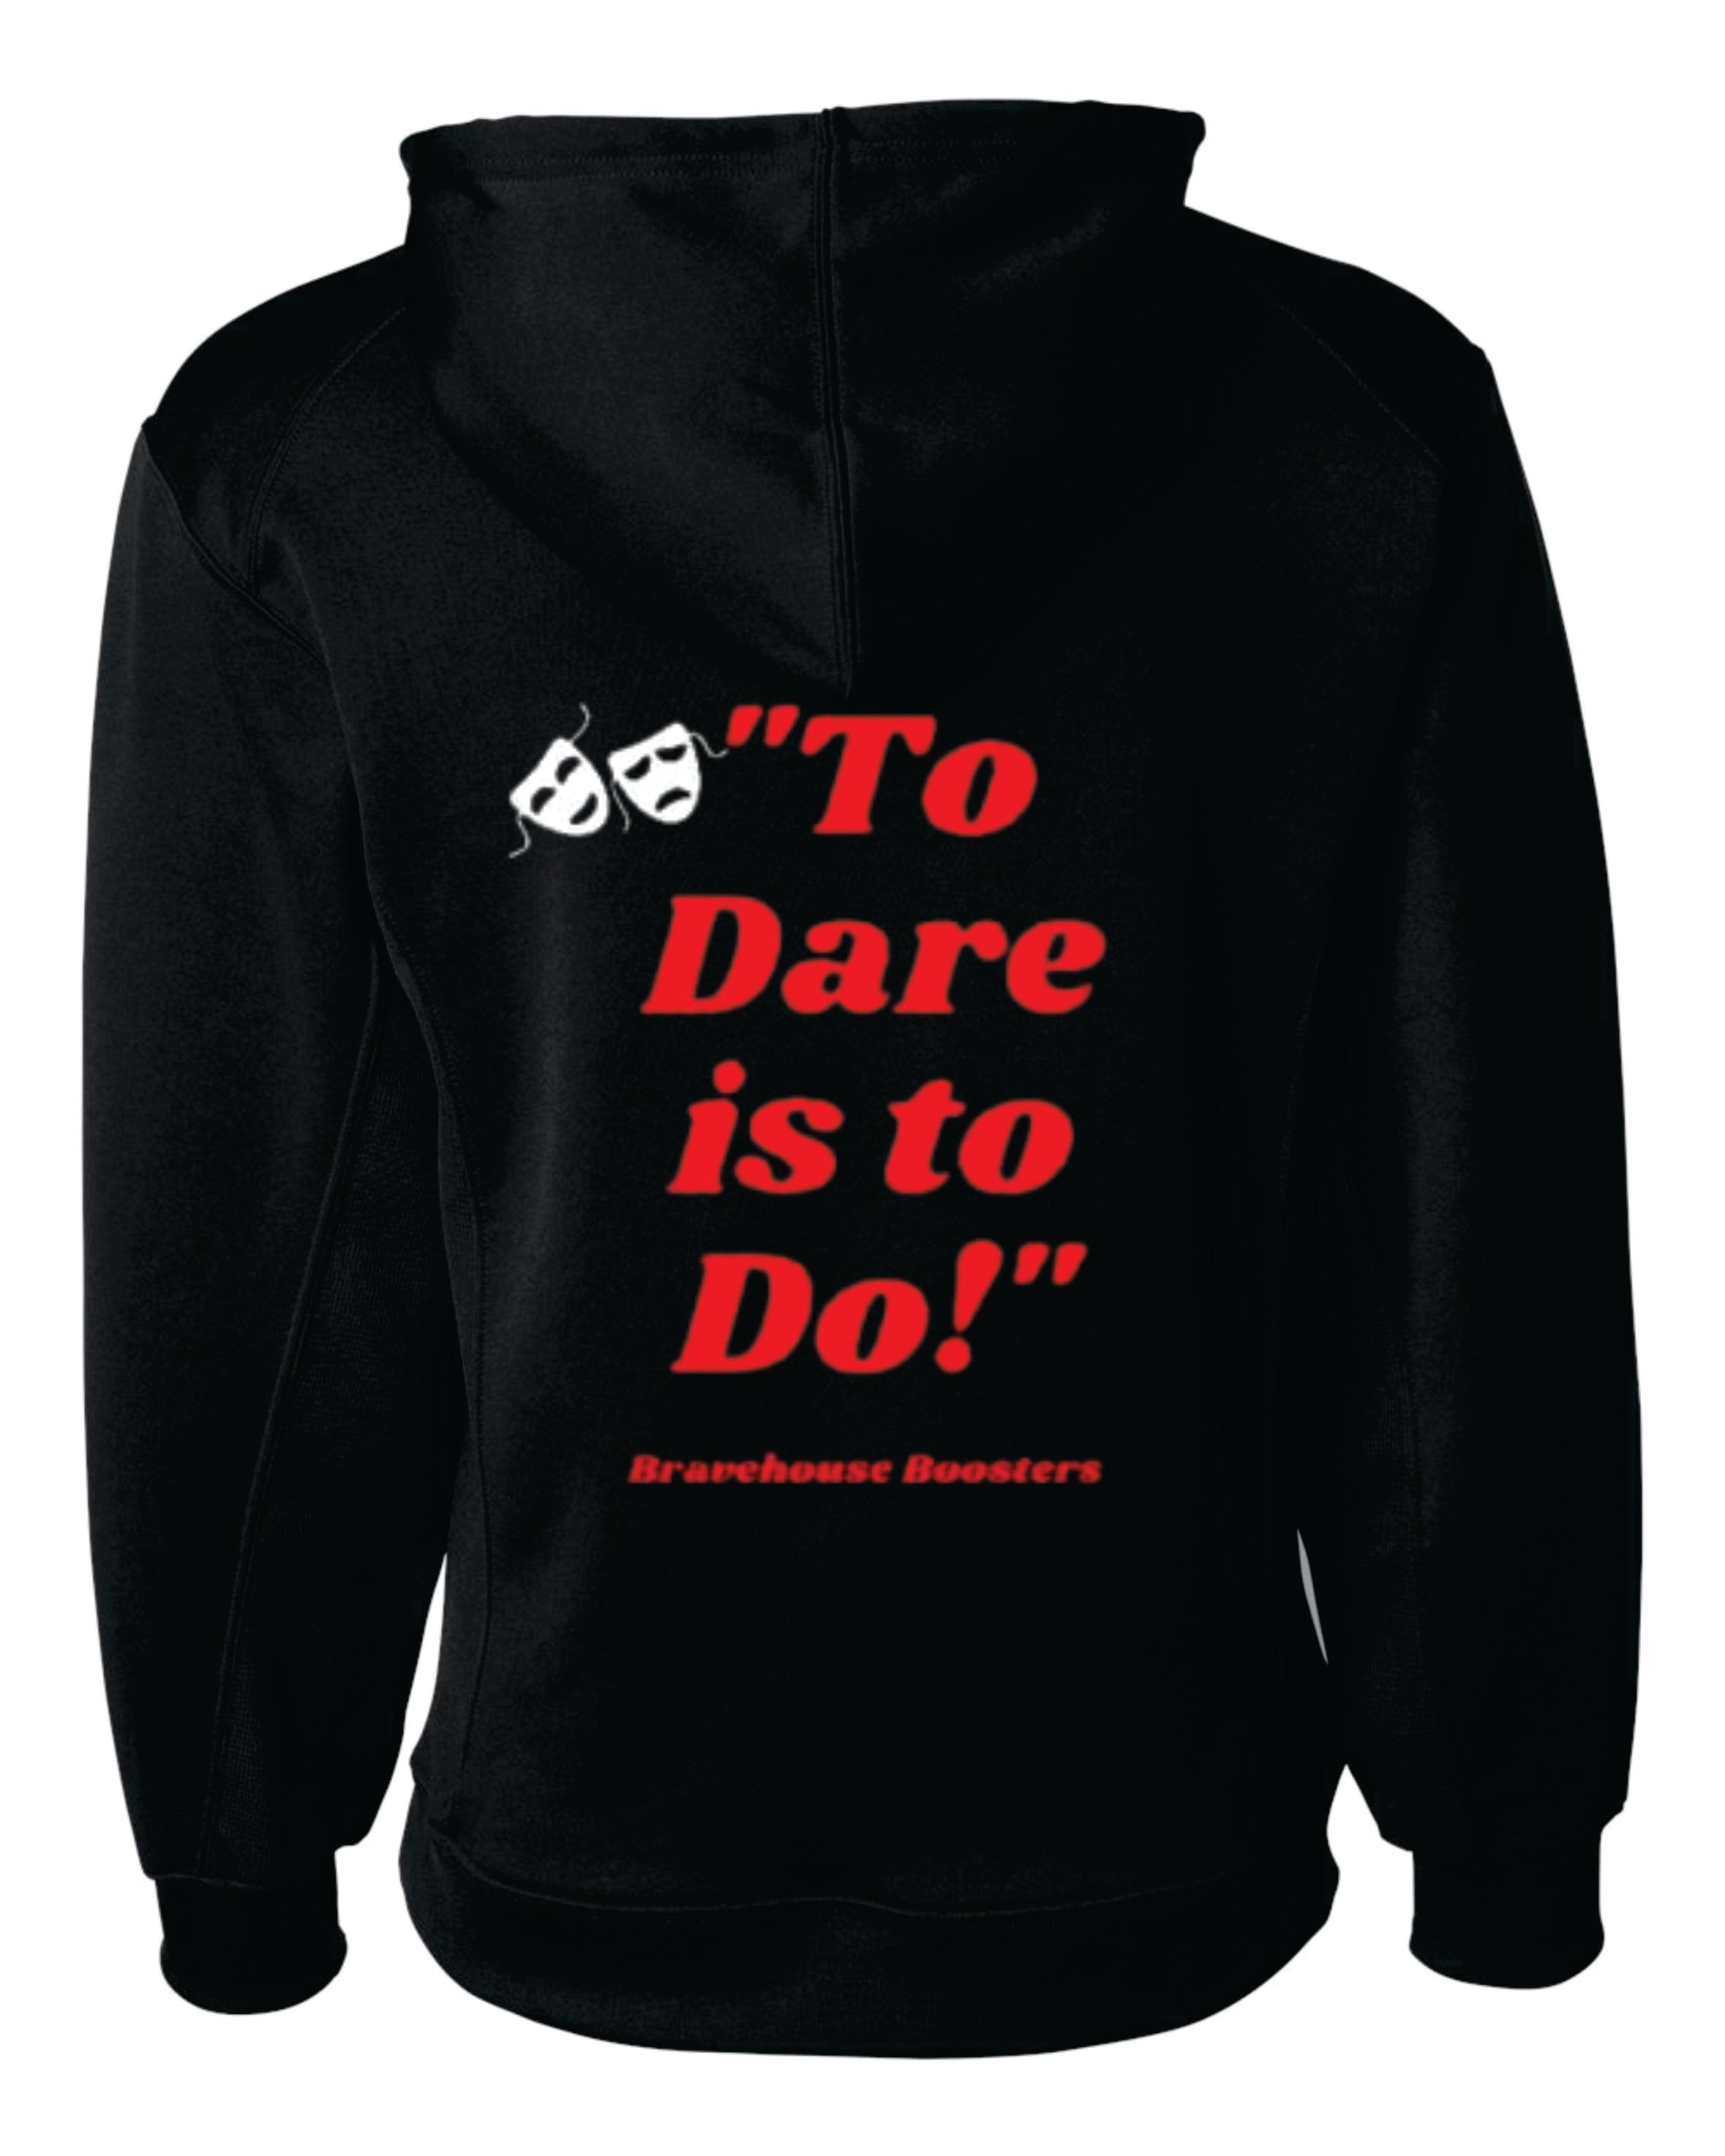 Chopticon Theater Badger Dri-fit Hoodie  YOUTH